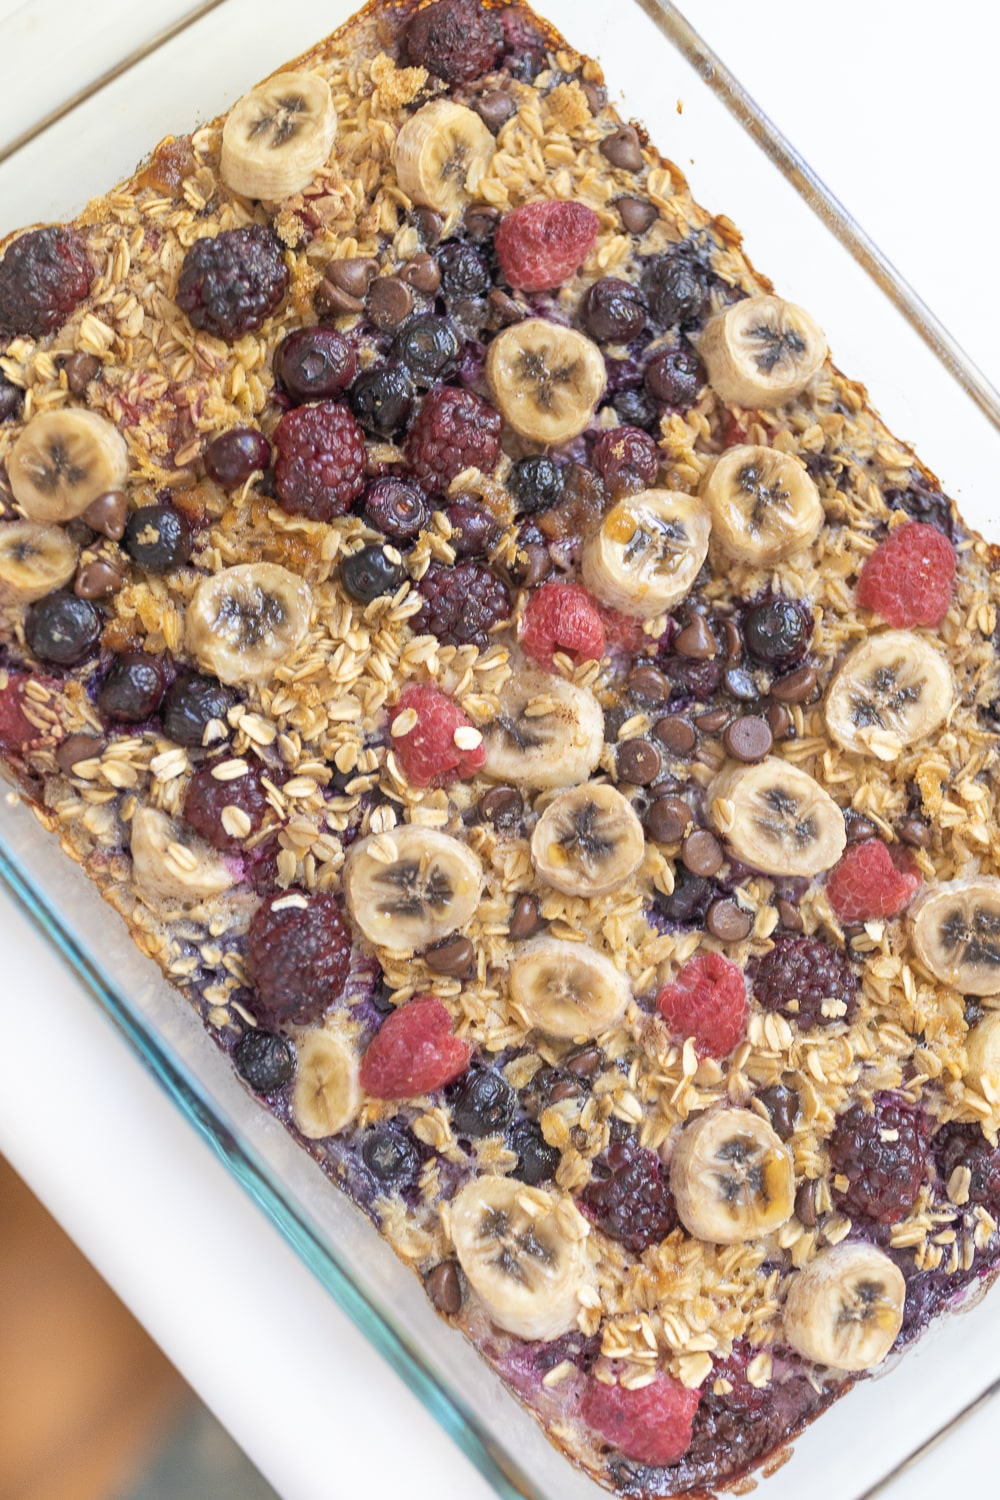 Baked oatmeal squares recipe by blogger Stephanie Ziajka on Diary of a Debutante